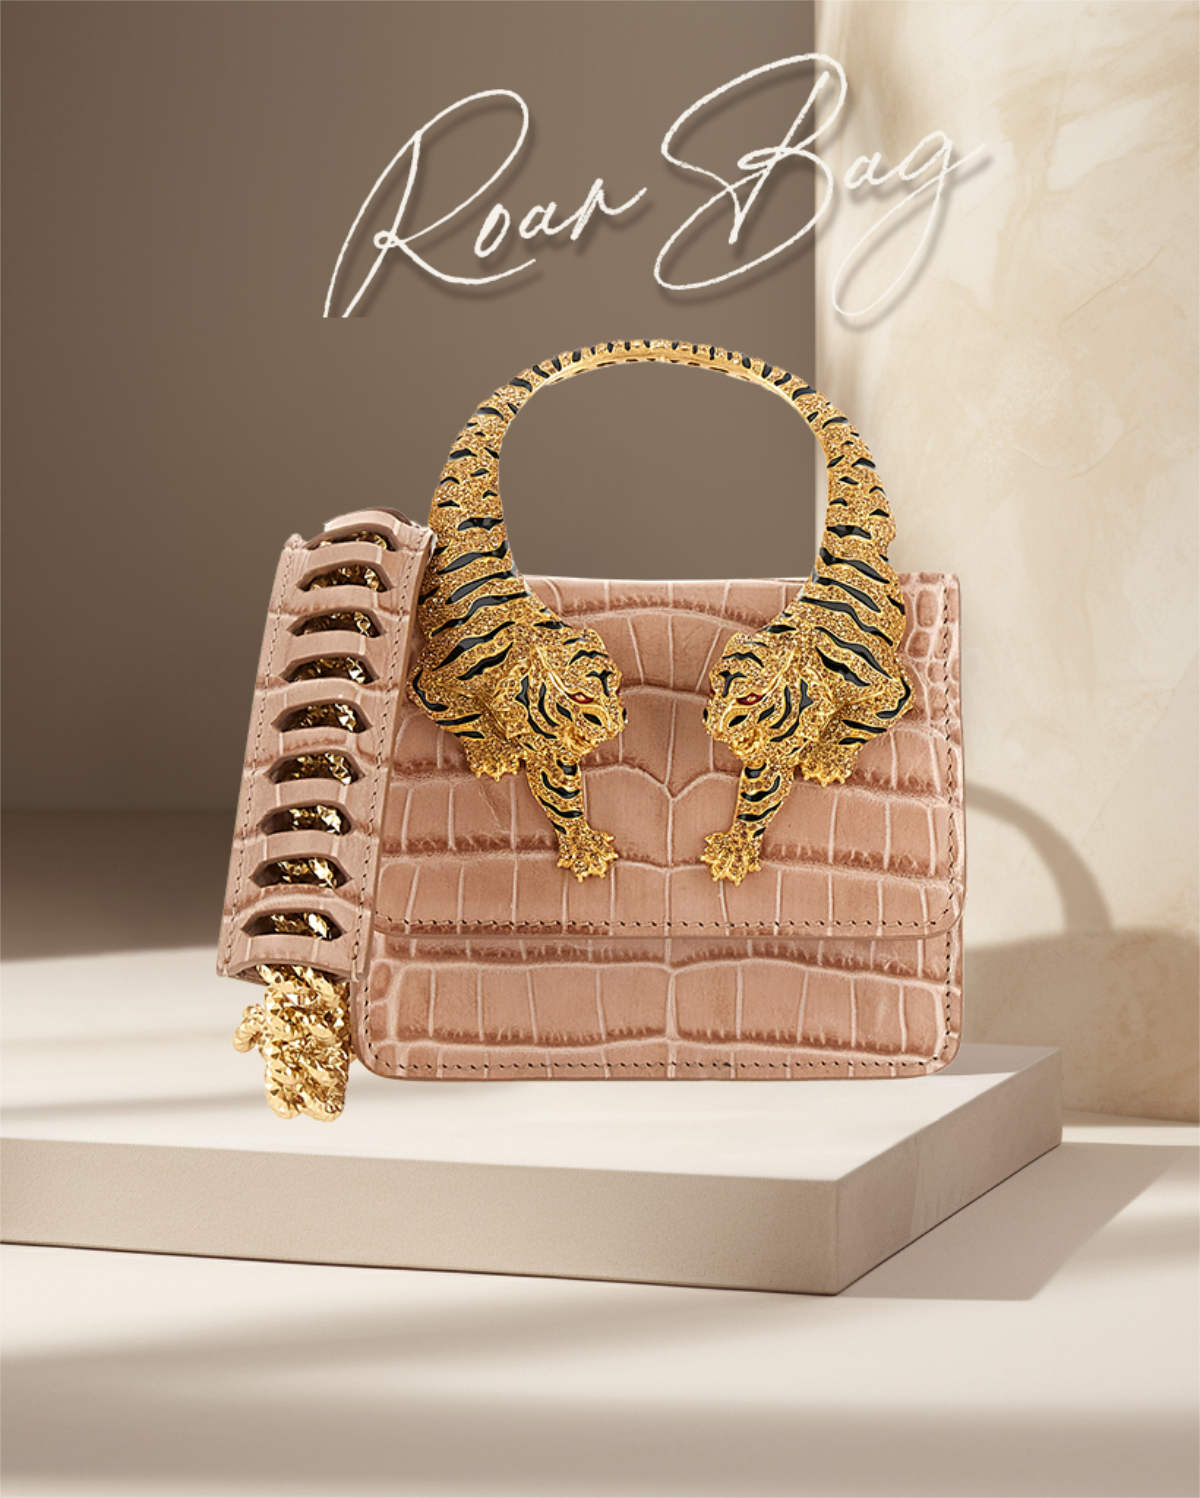 Roberto Cavalli's Roar Bag, The New Must-Have For Spring Summer 2024